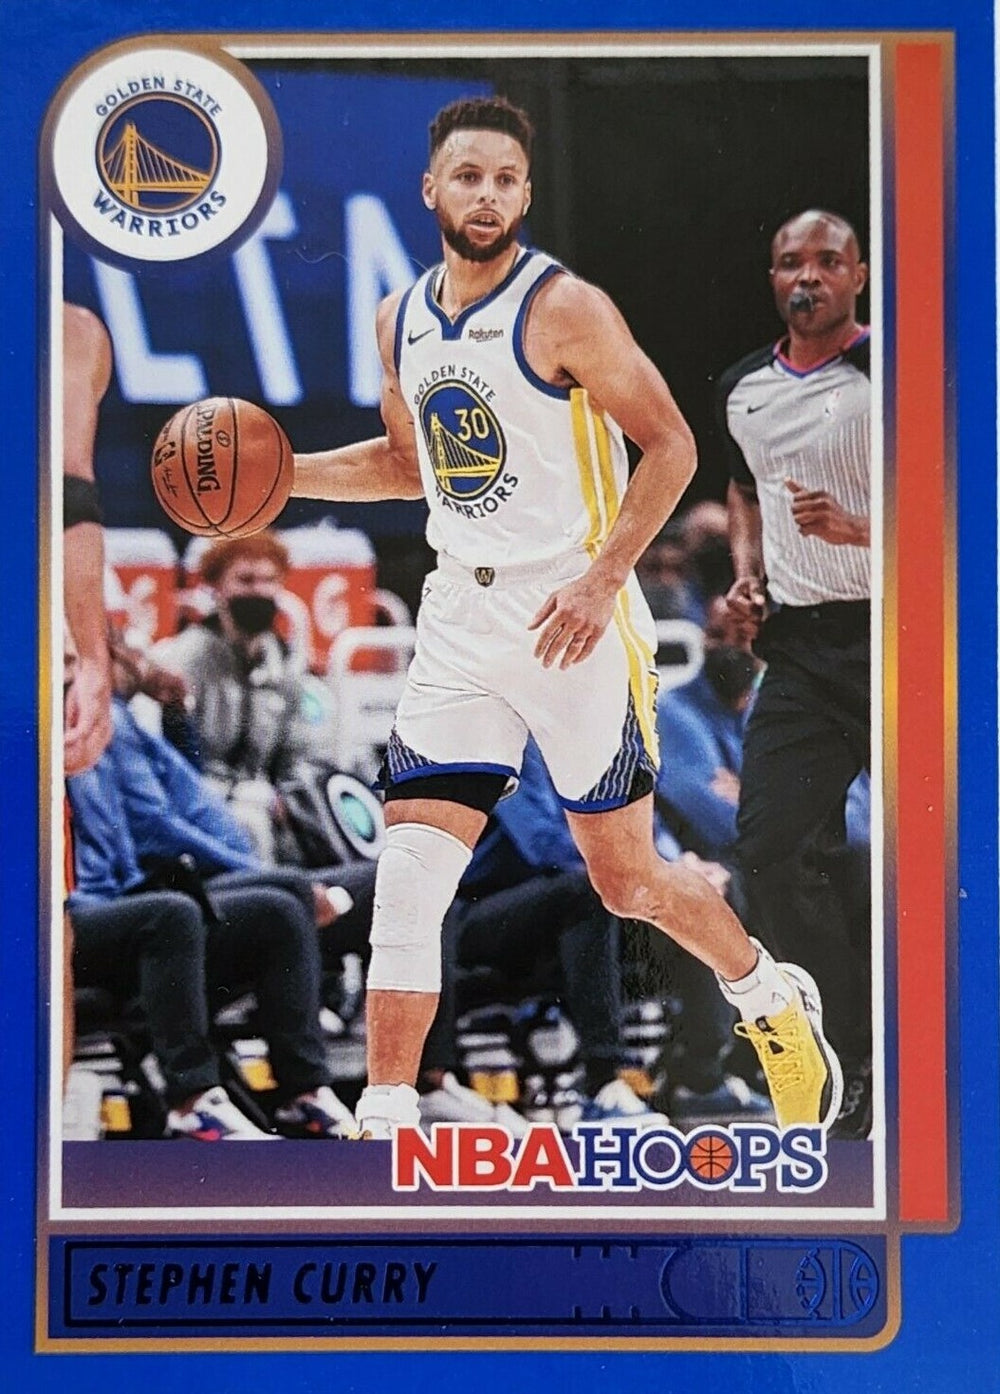 Stephen Curry 2021 2022 Hoops Basketball Series Mint BLUE Parallel Version Card #18